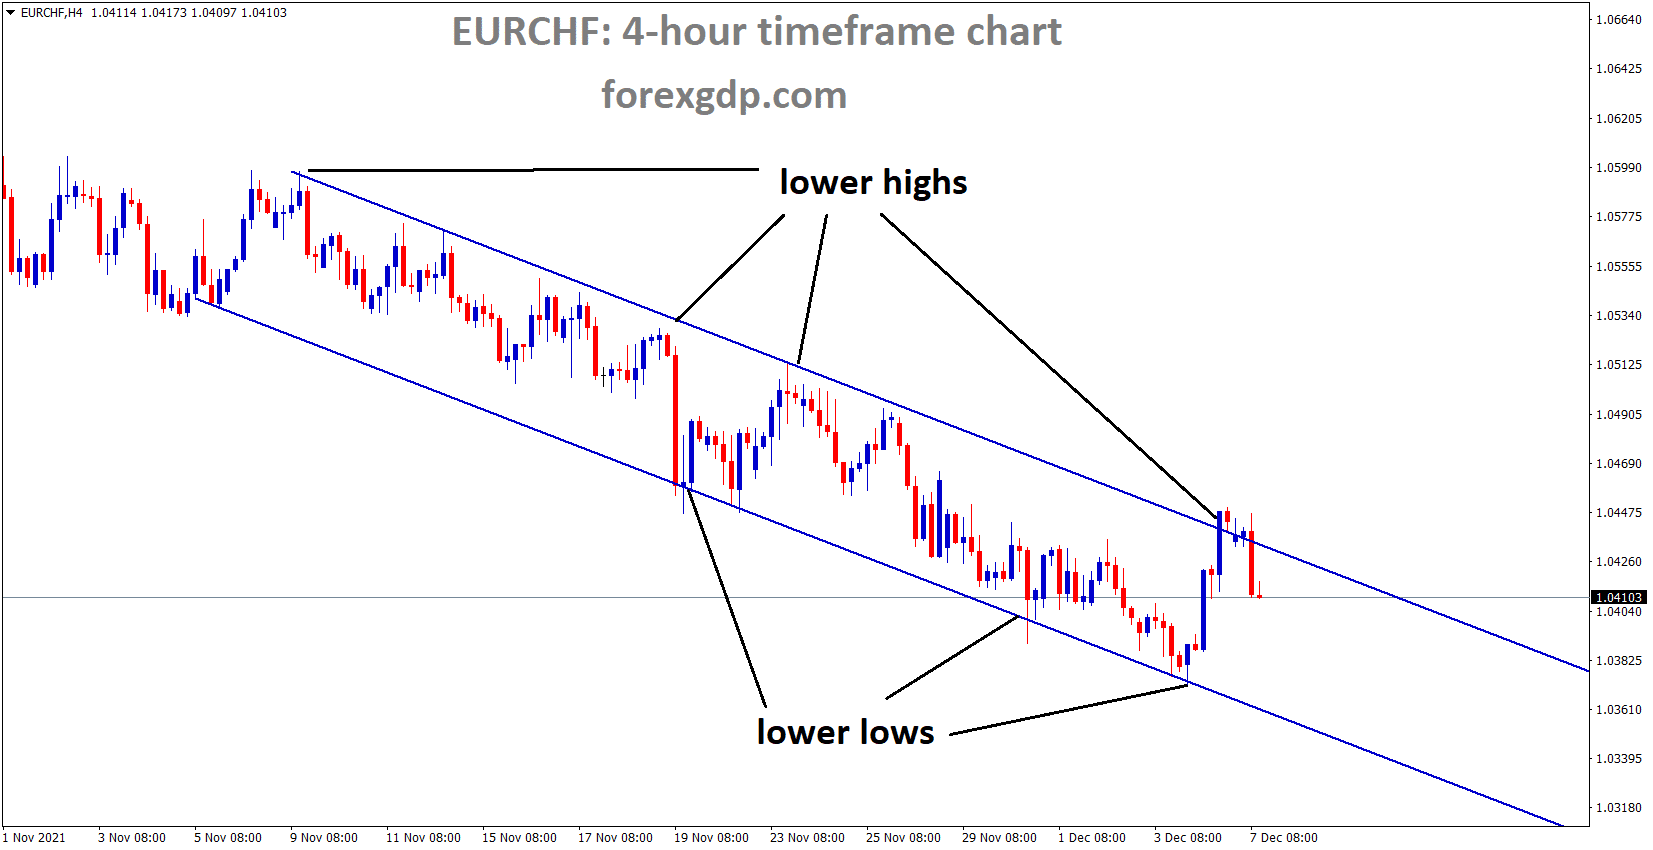 EURCHF is moving in the Descending channel and market falling from the lower high area of the channel